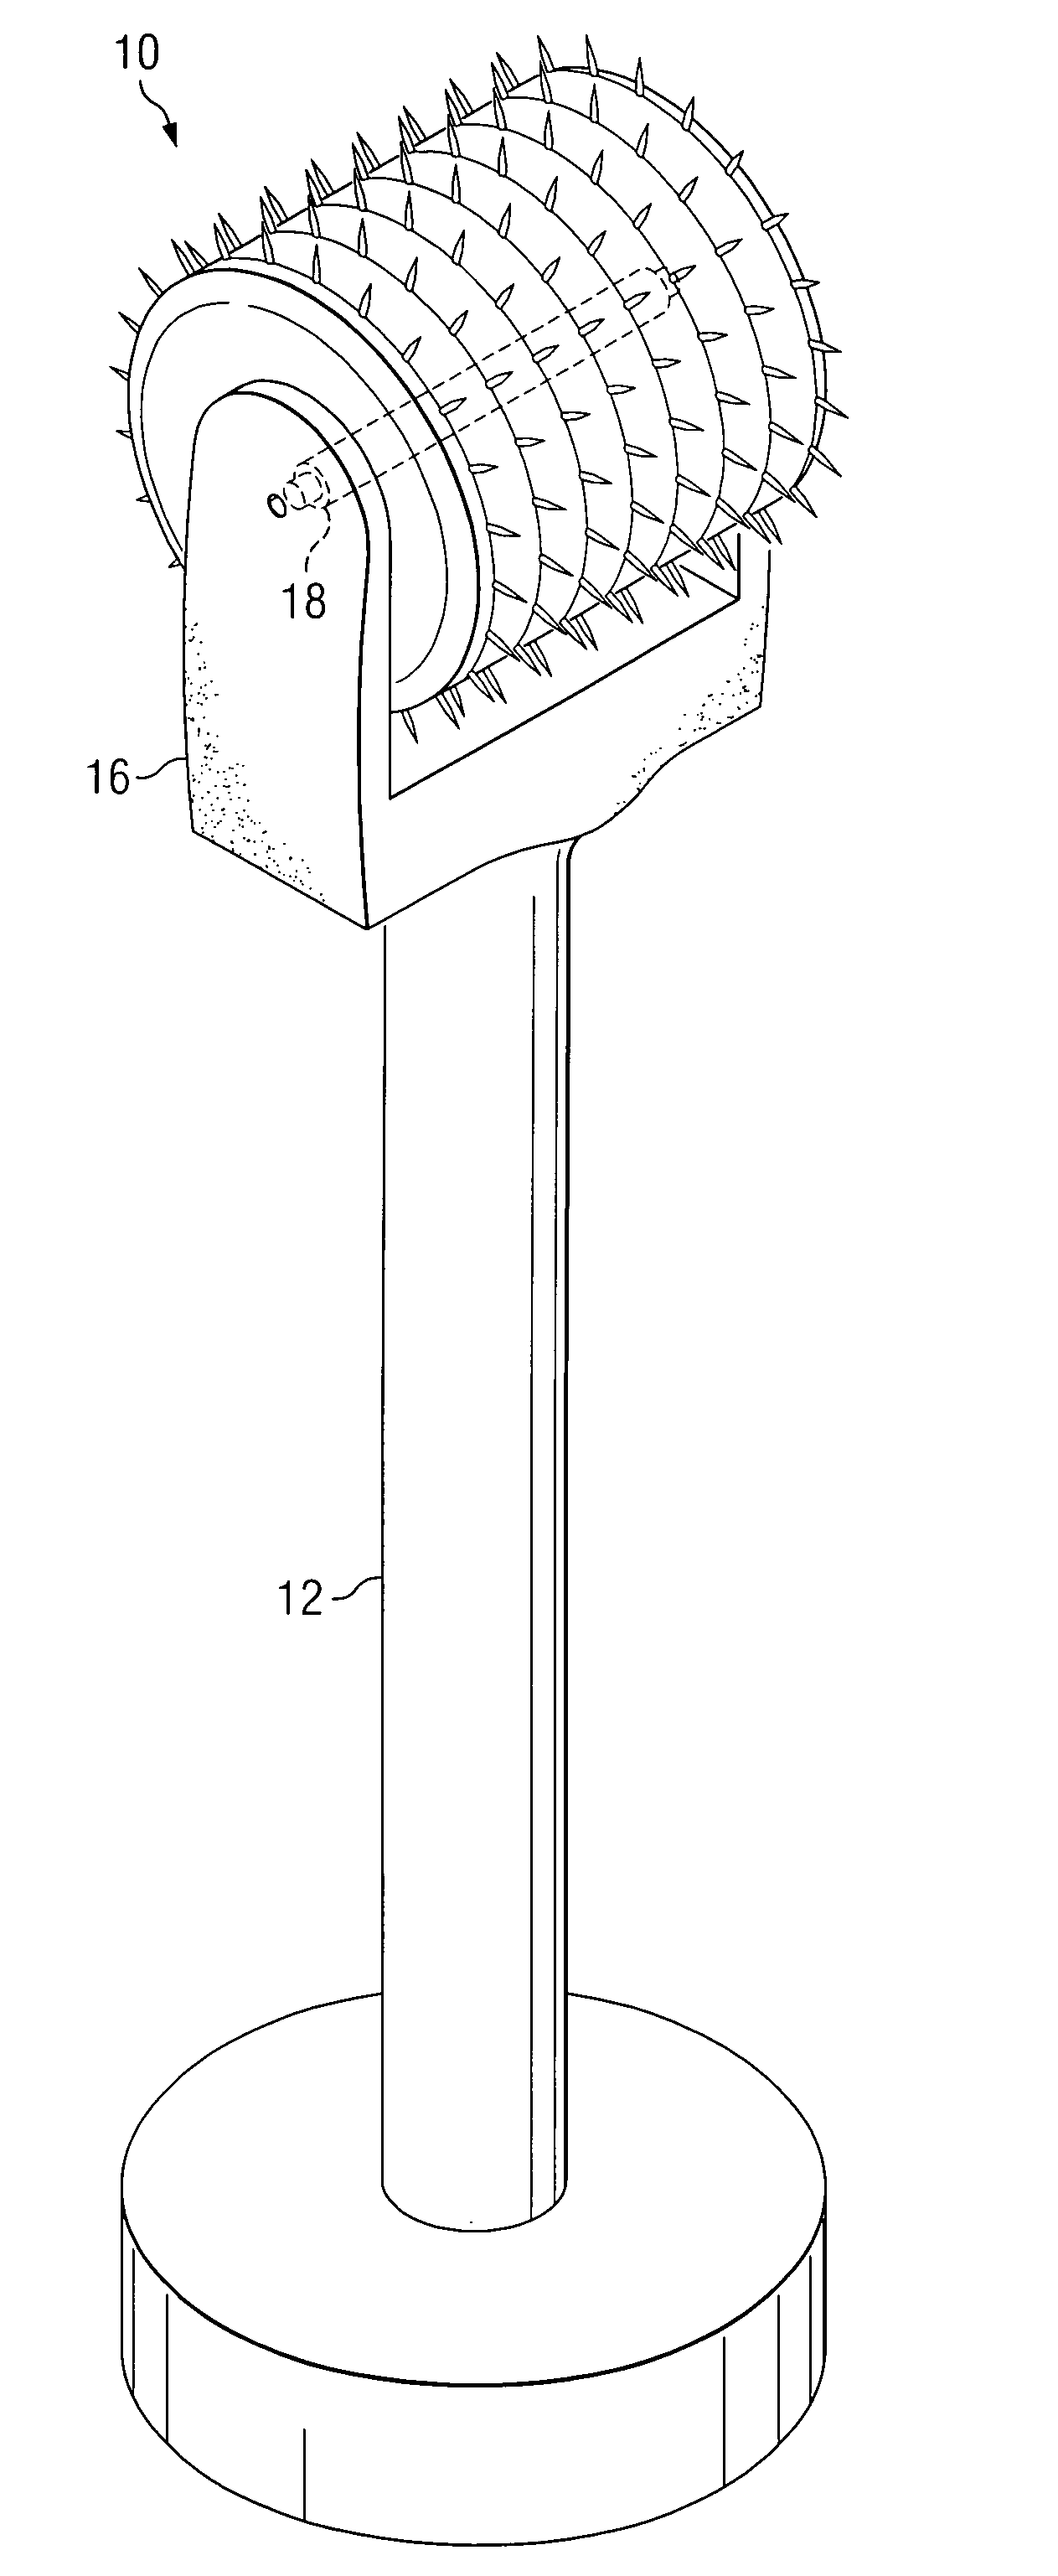 Apparatus, system, and method to deliver optimal elements in order to enhance the aesthetic appearance of the skin